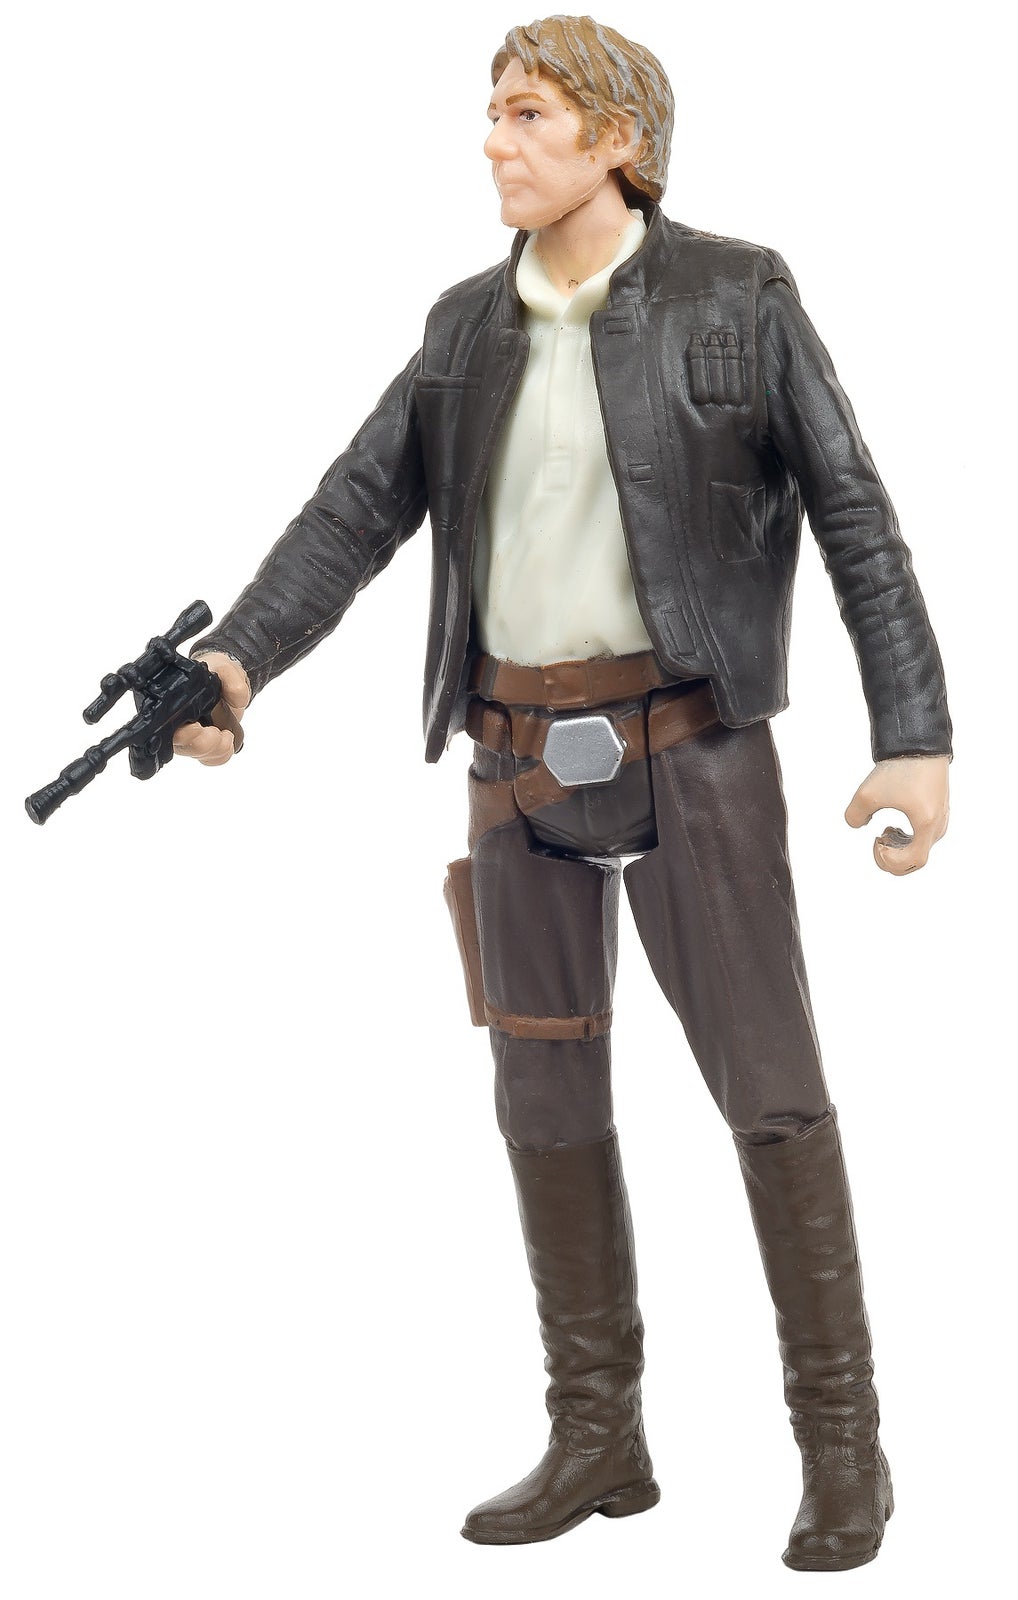 0//Star Wars\\0 Han Solo - The Force Awakens -